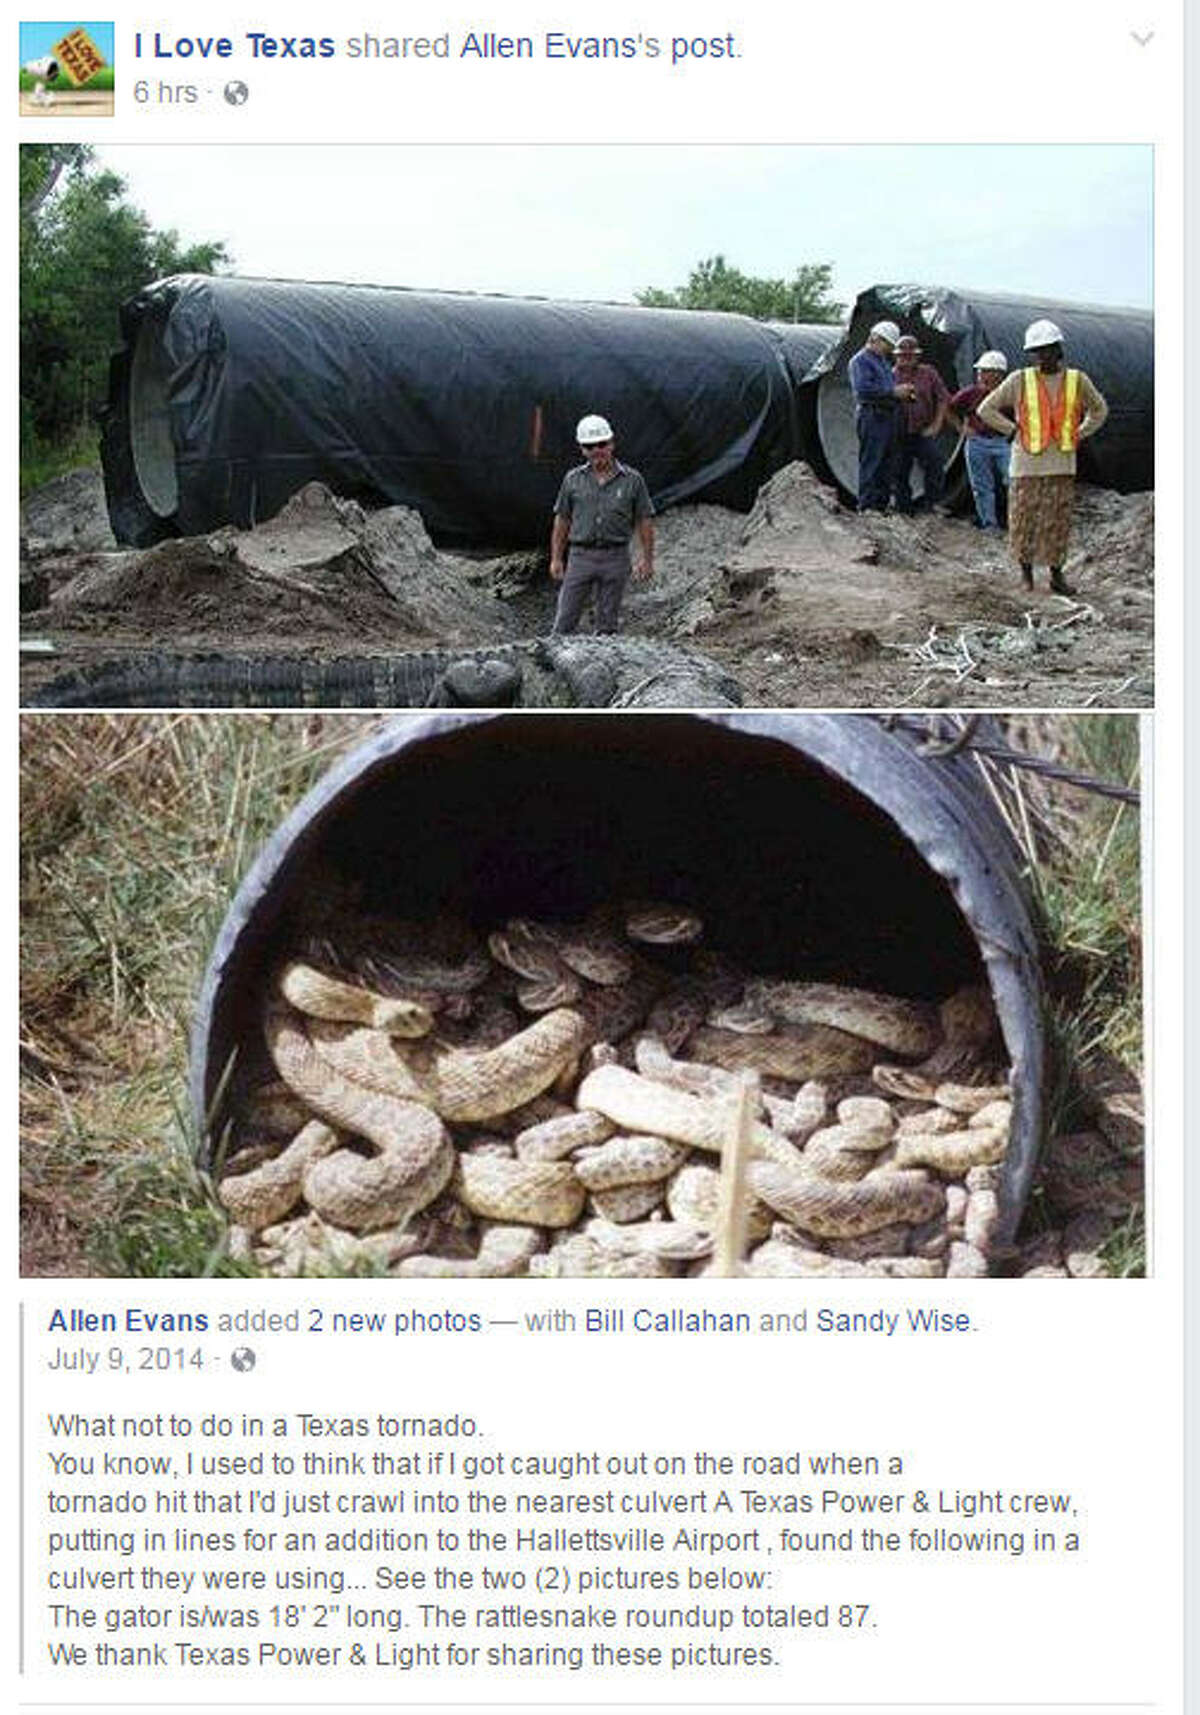 Photos alleging to show a giant rattlesnake den and a monster gator inside a Texas culvert, or drain pipe, are making the rounds among Texas Facebook users thanks to a post by I Love Texas. 